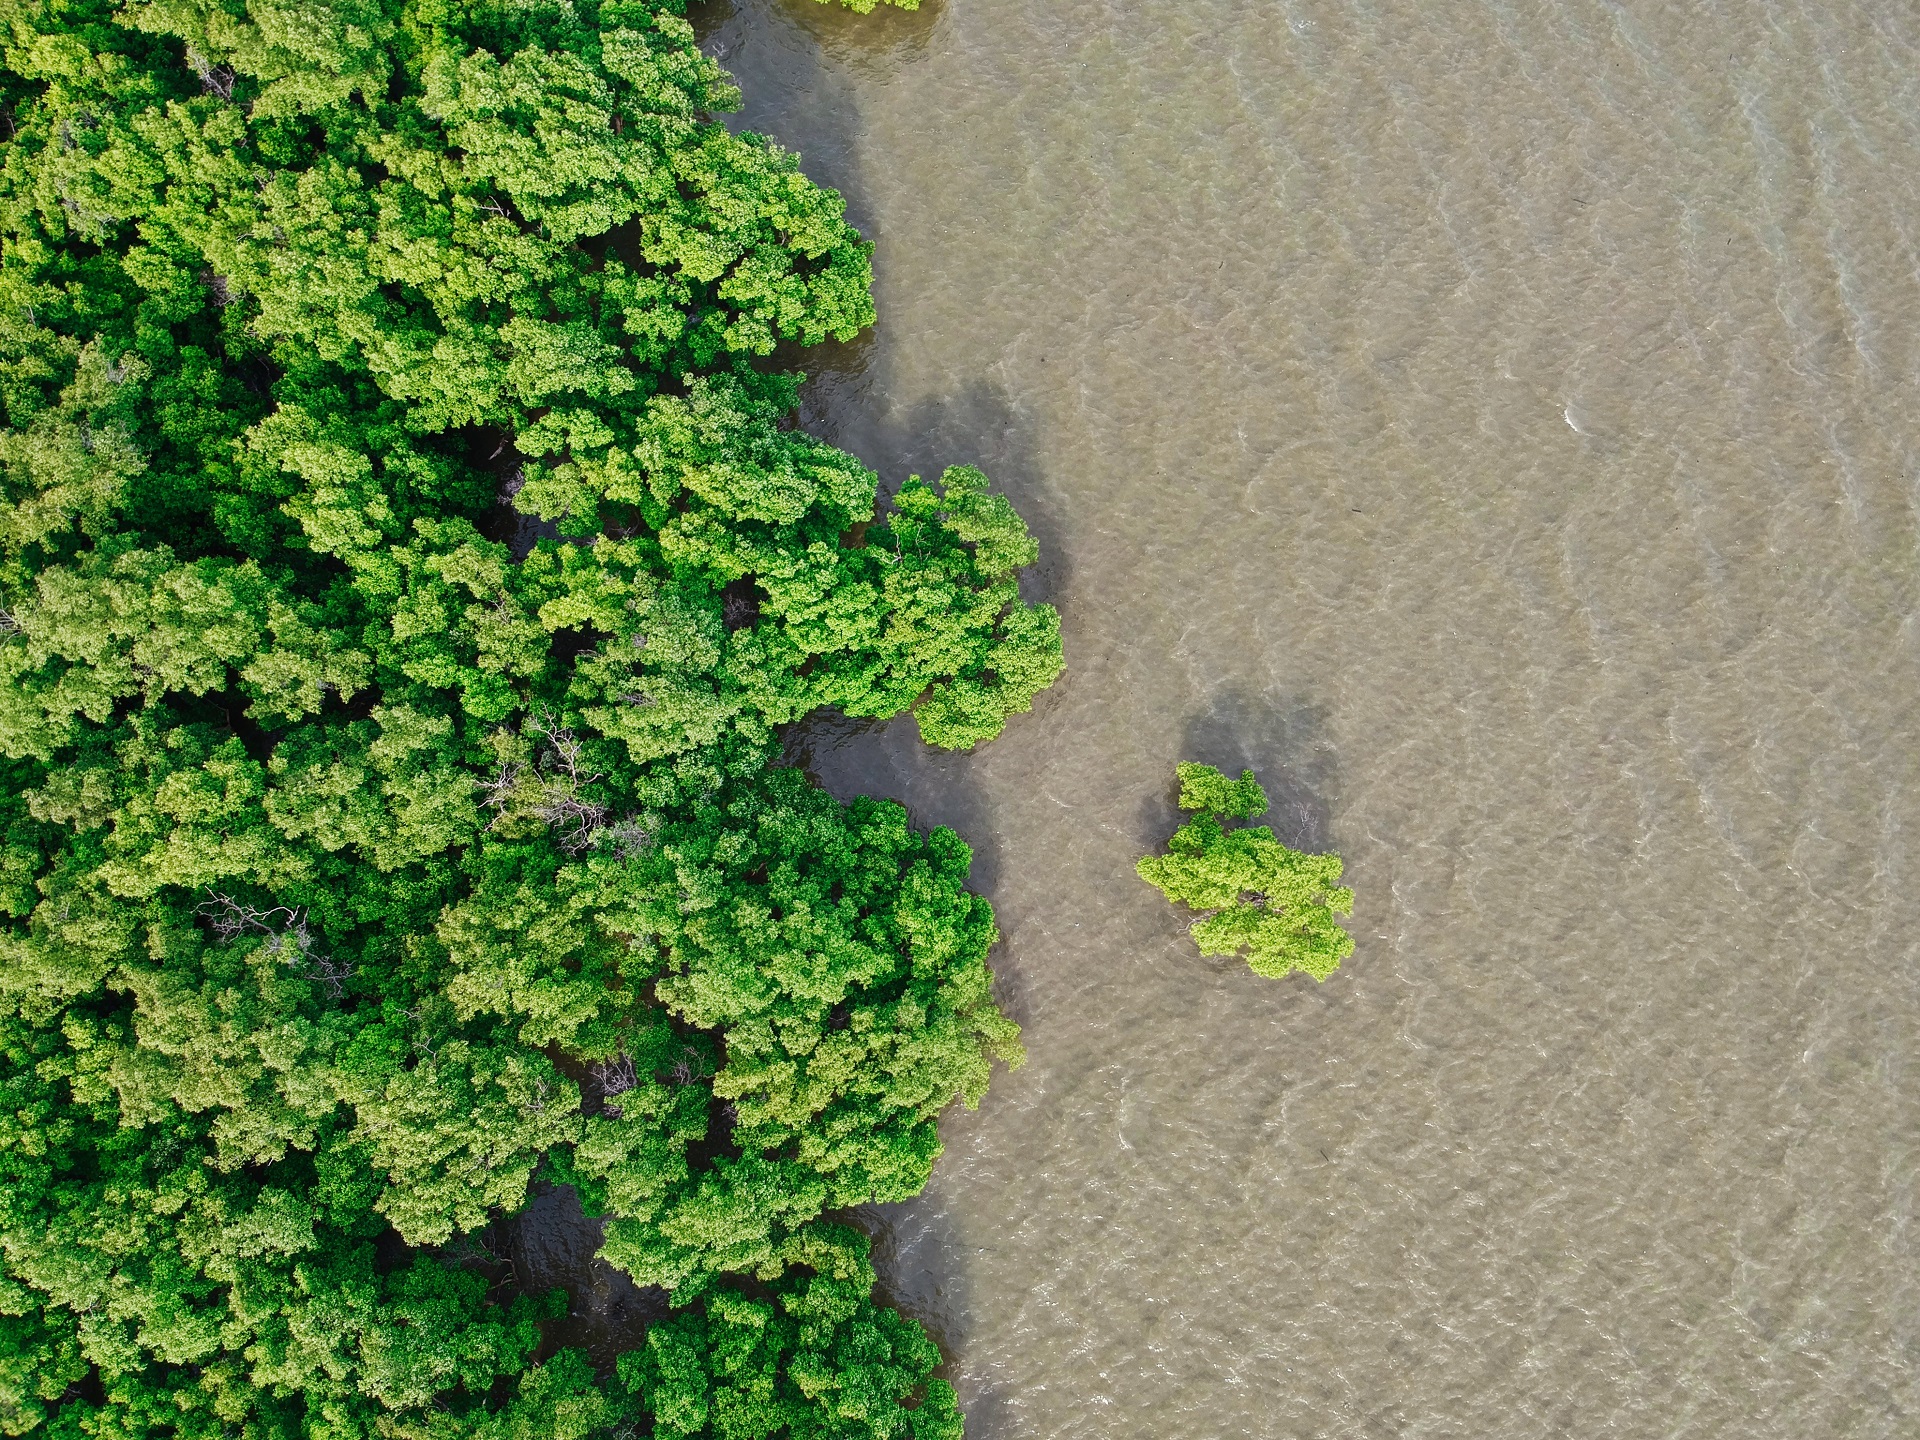 birds eye image of mangrove trees and river